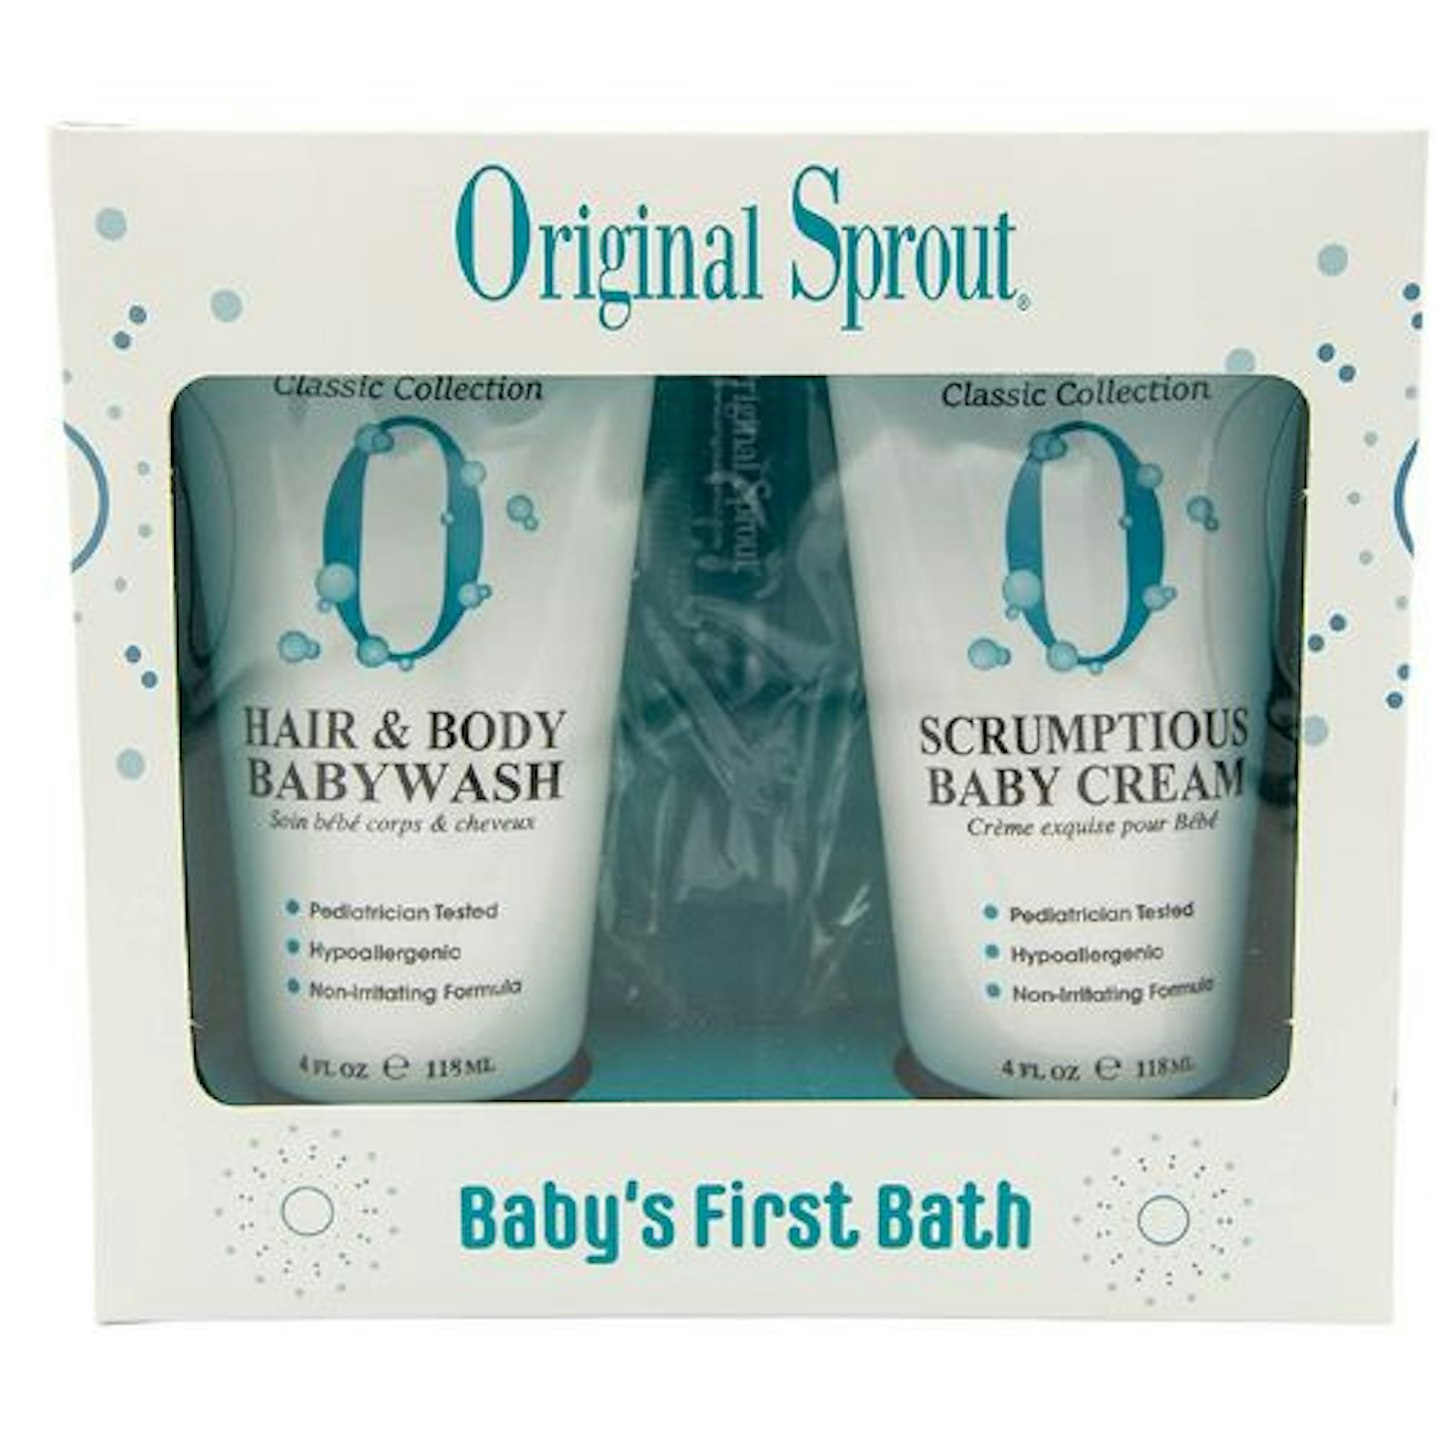 Original Sprout Baby's First Bath Kit - Baby shower gift